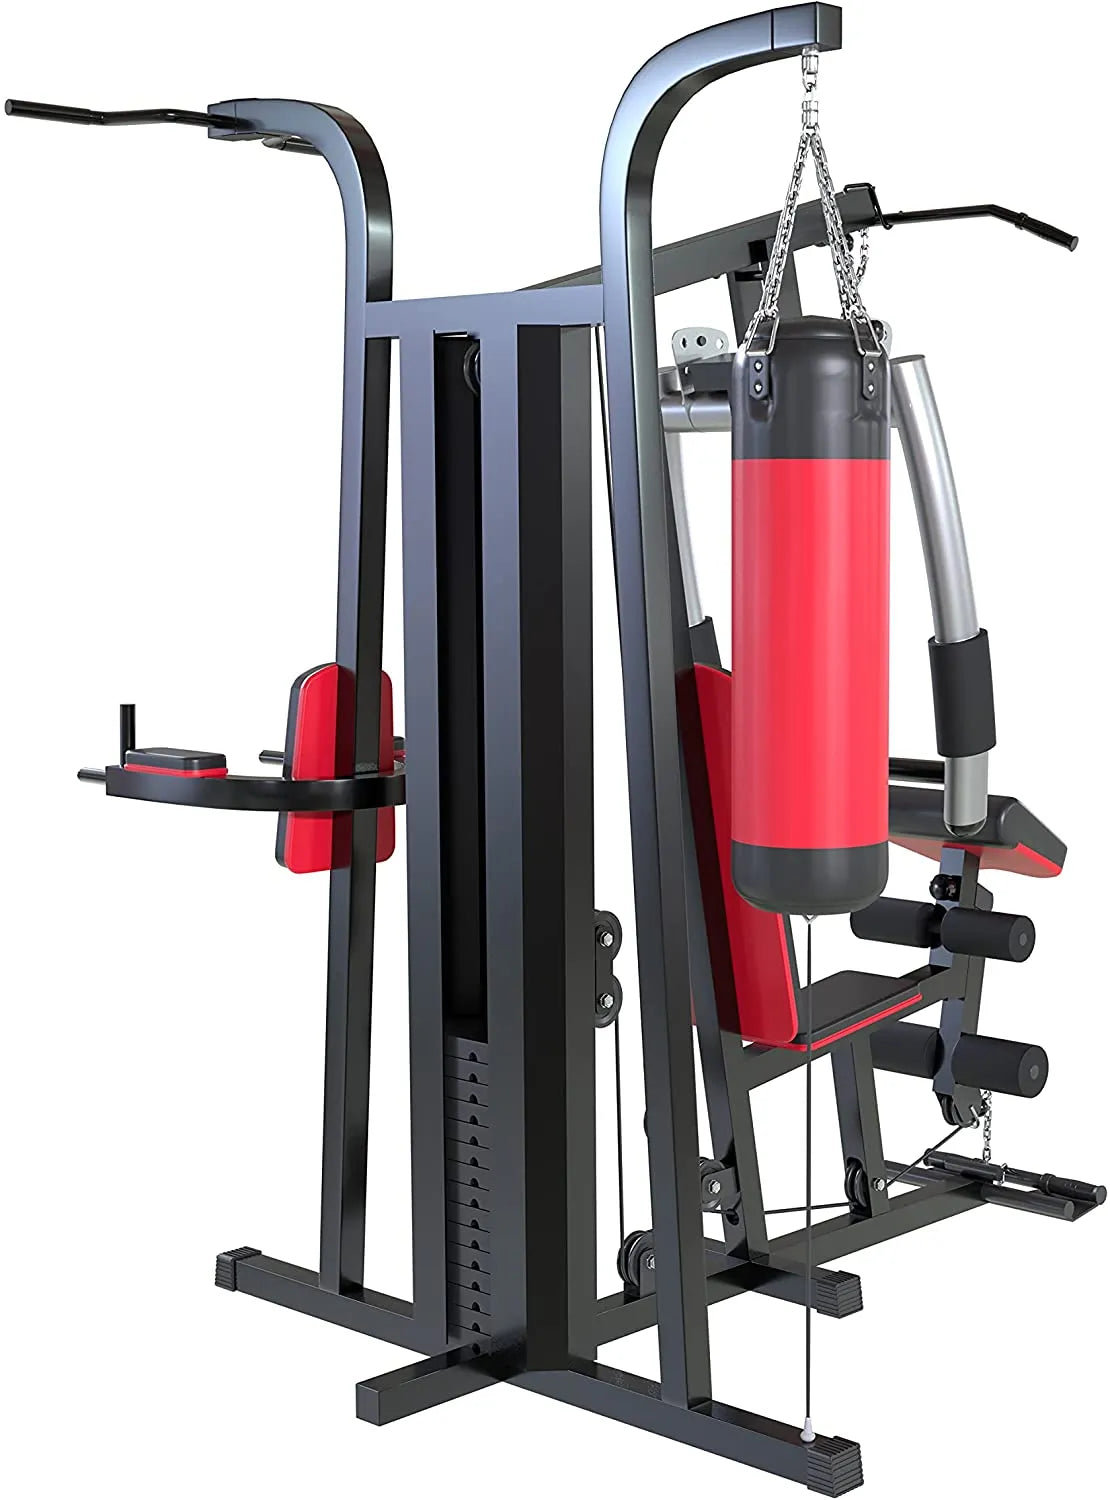 STATION MULTI GYM CABLE MACHINE FOR HOME AND COMMERCIAL GYMS MF